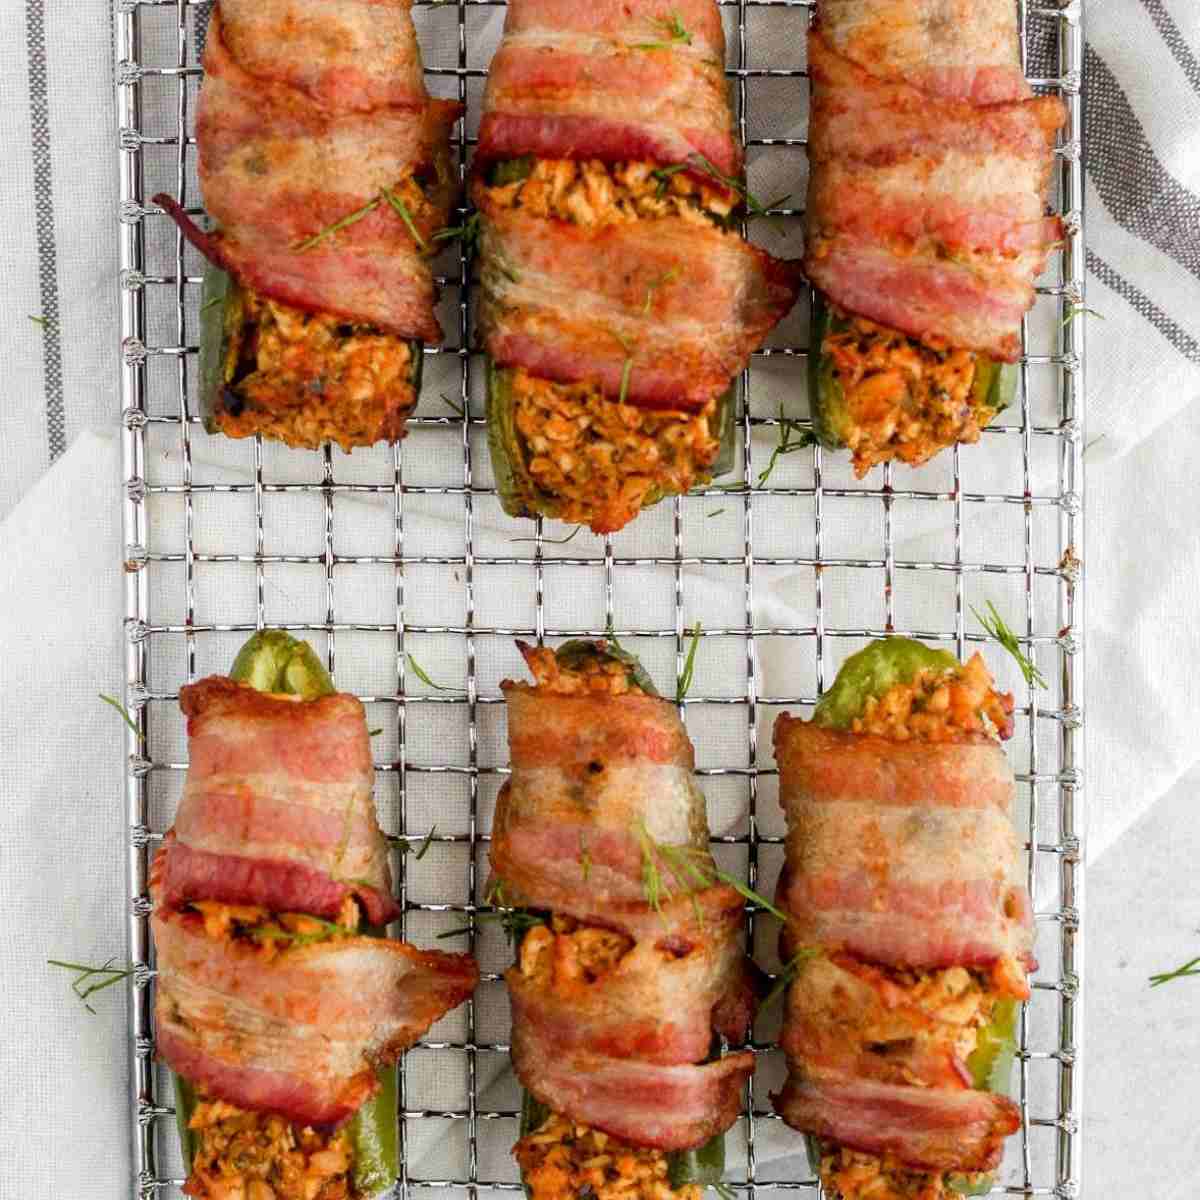 Buffalo chicken poppers on a wire rack on a white kitchen towel.